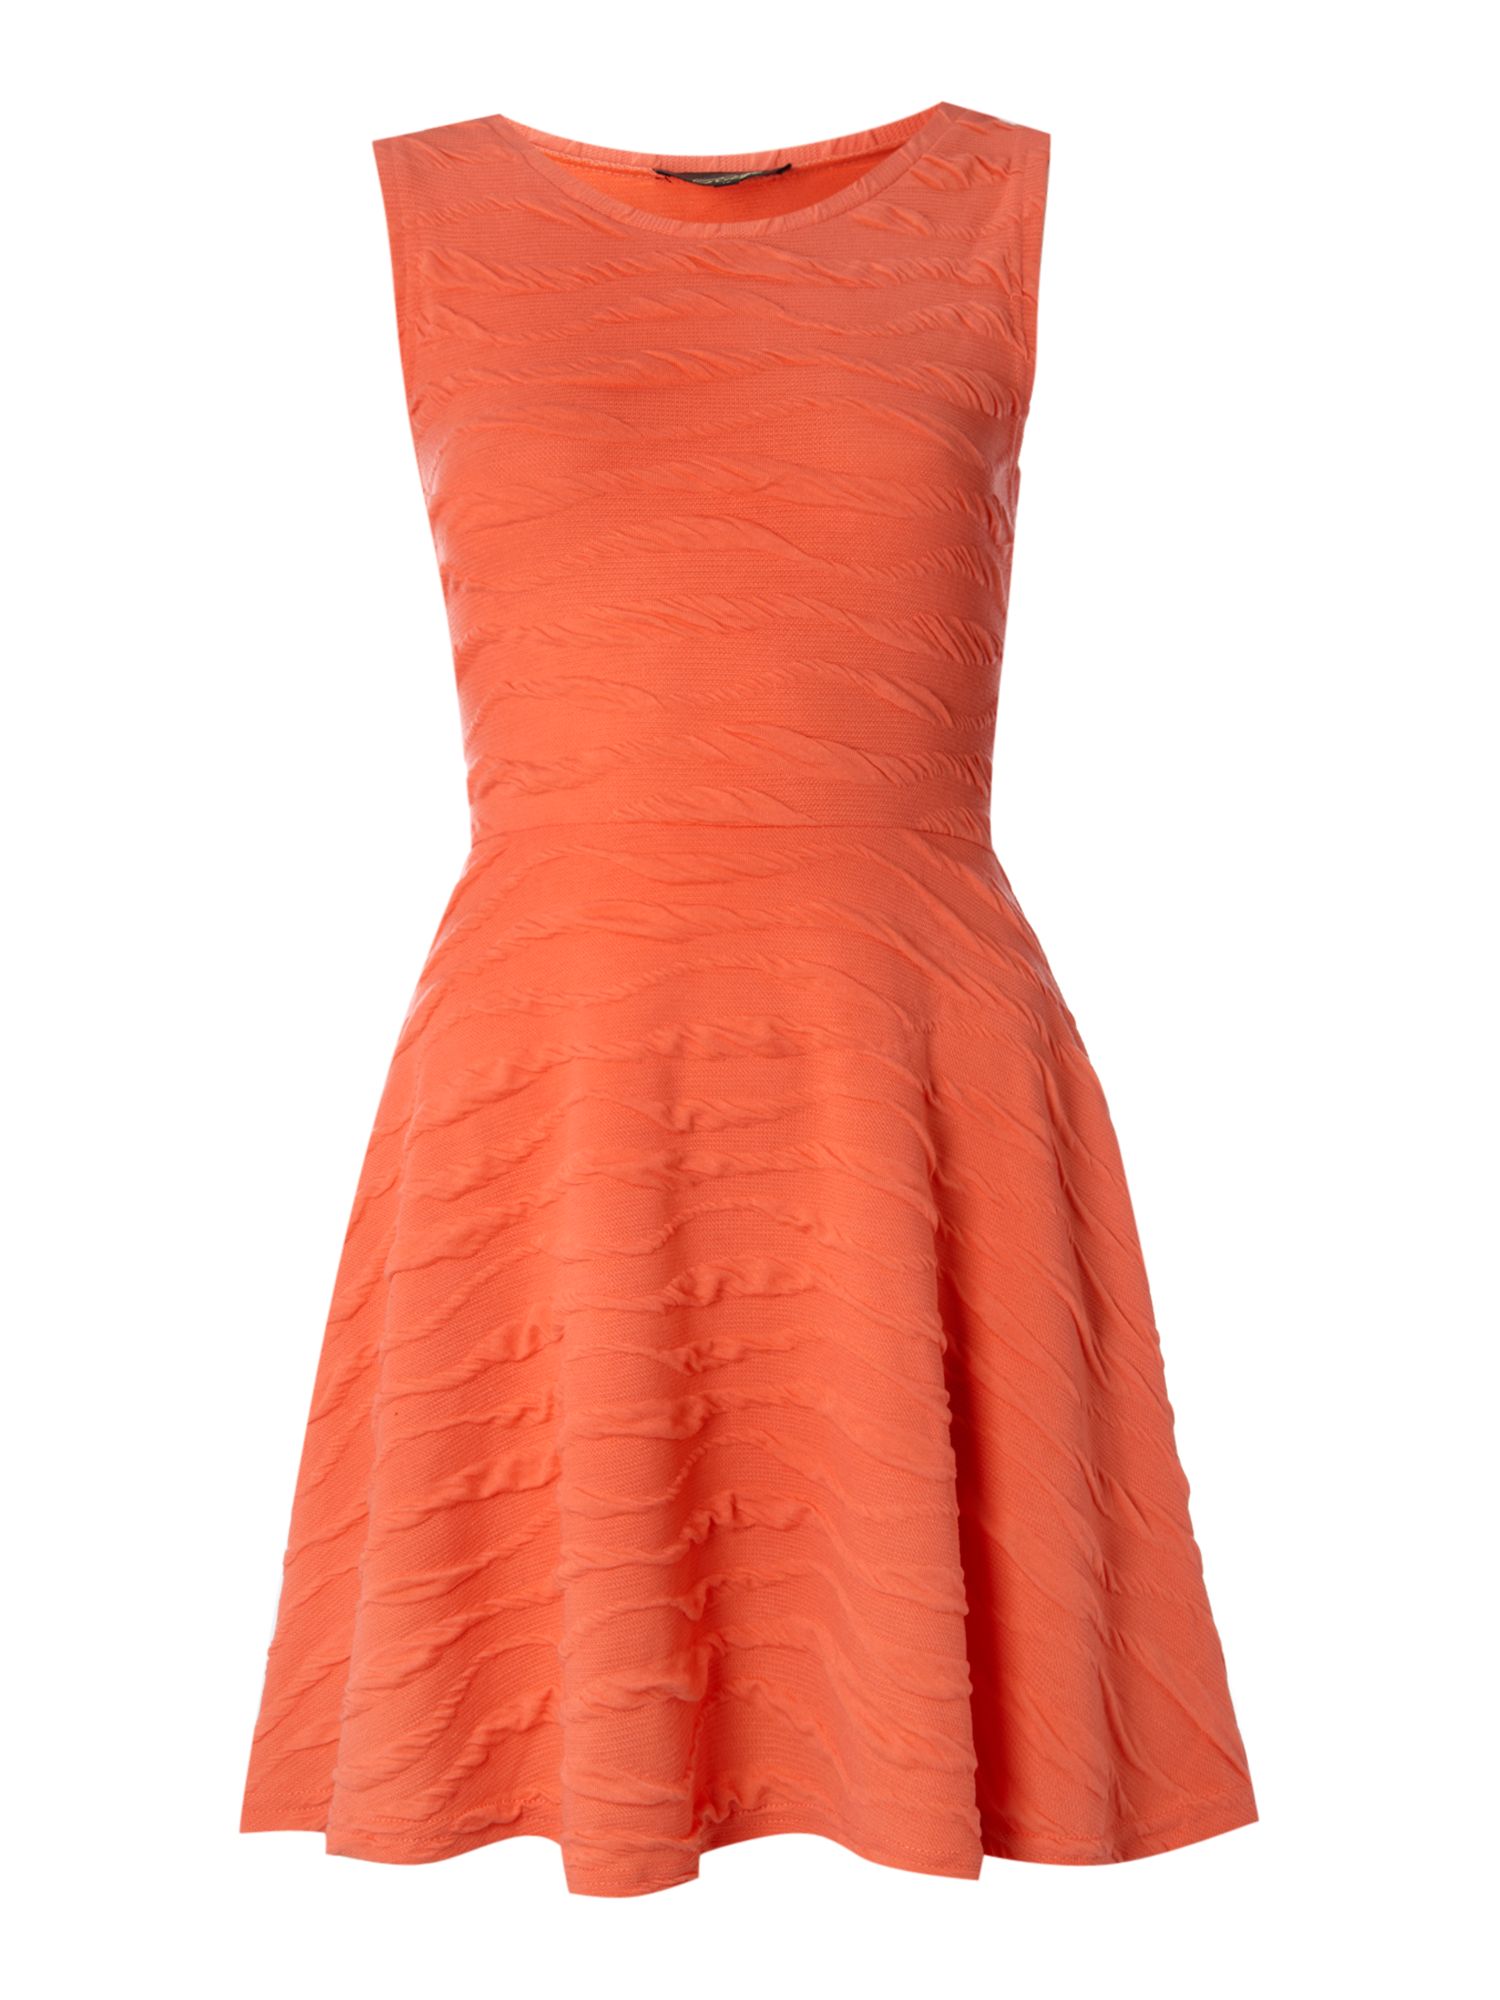 Madam Rage Madam Rage Cut Out Skater Dress in Red (coral) | Lyst